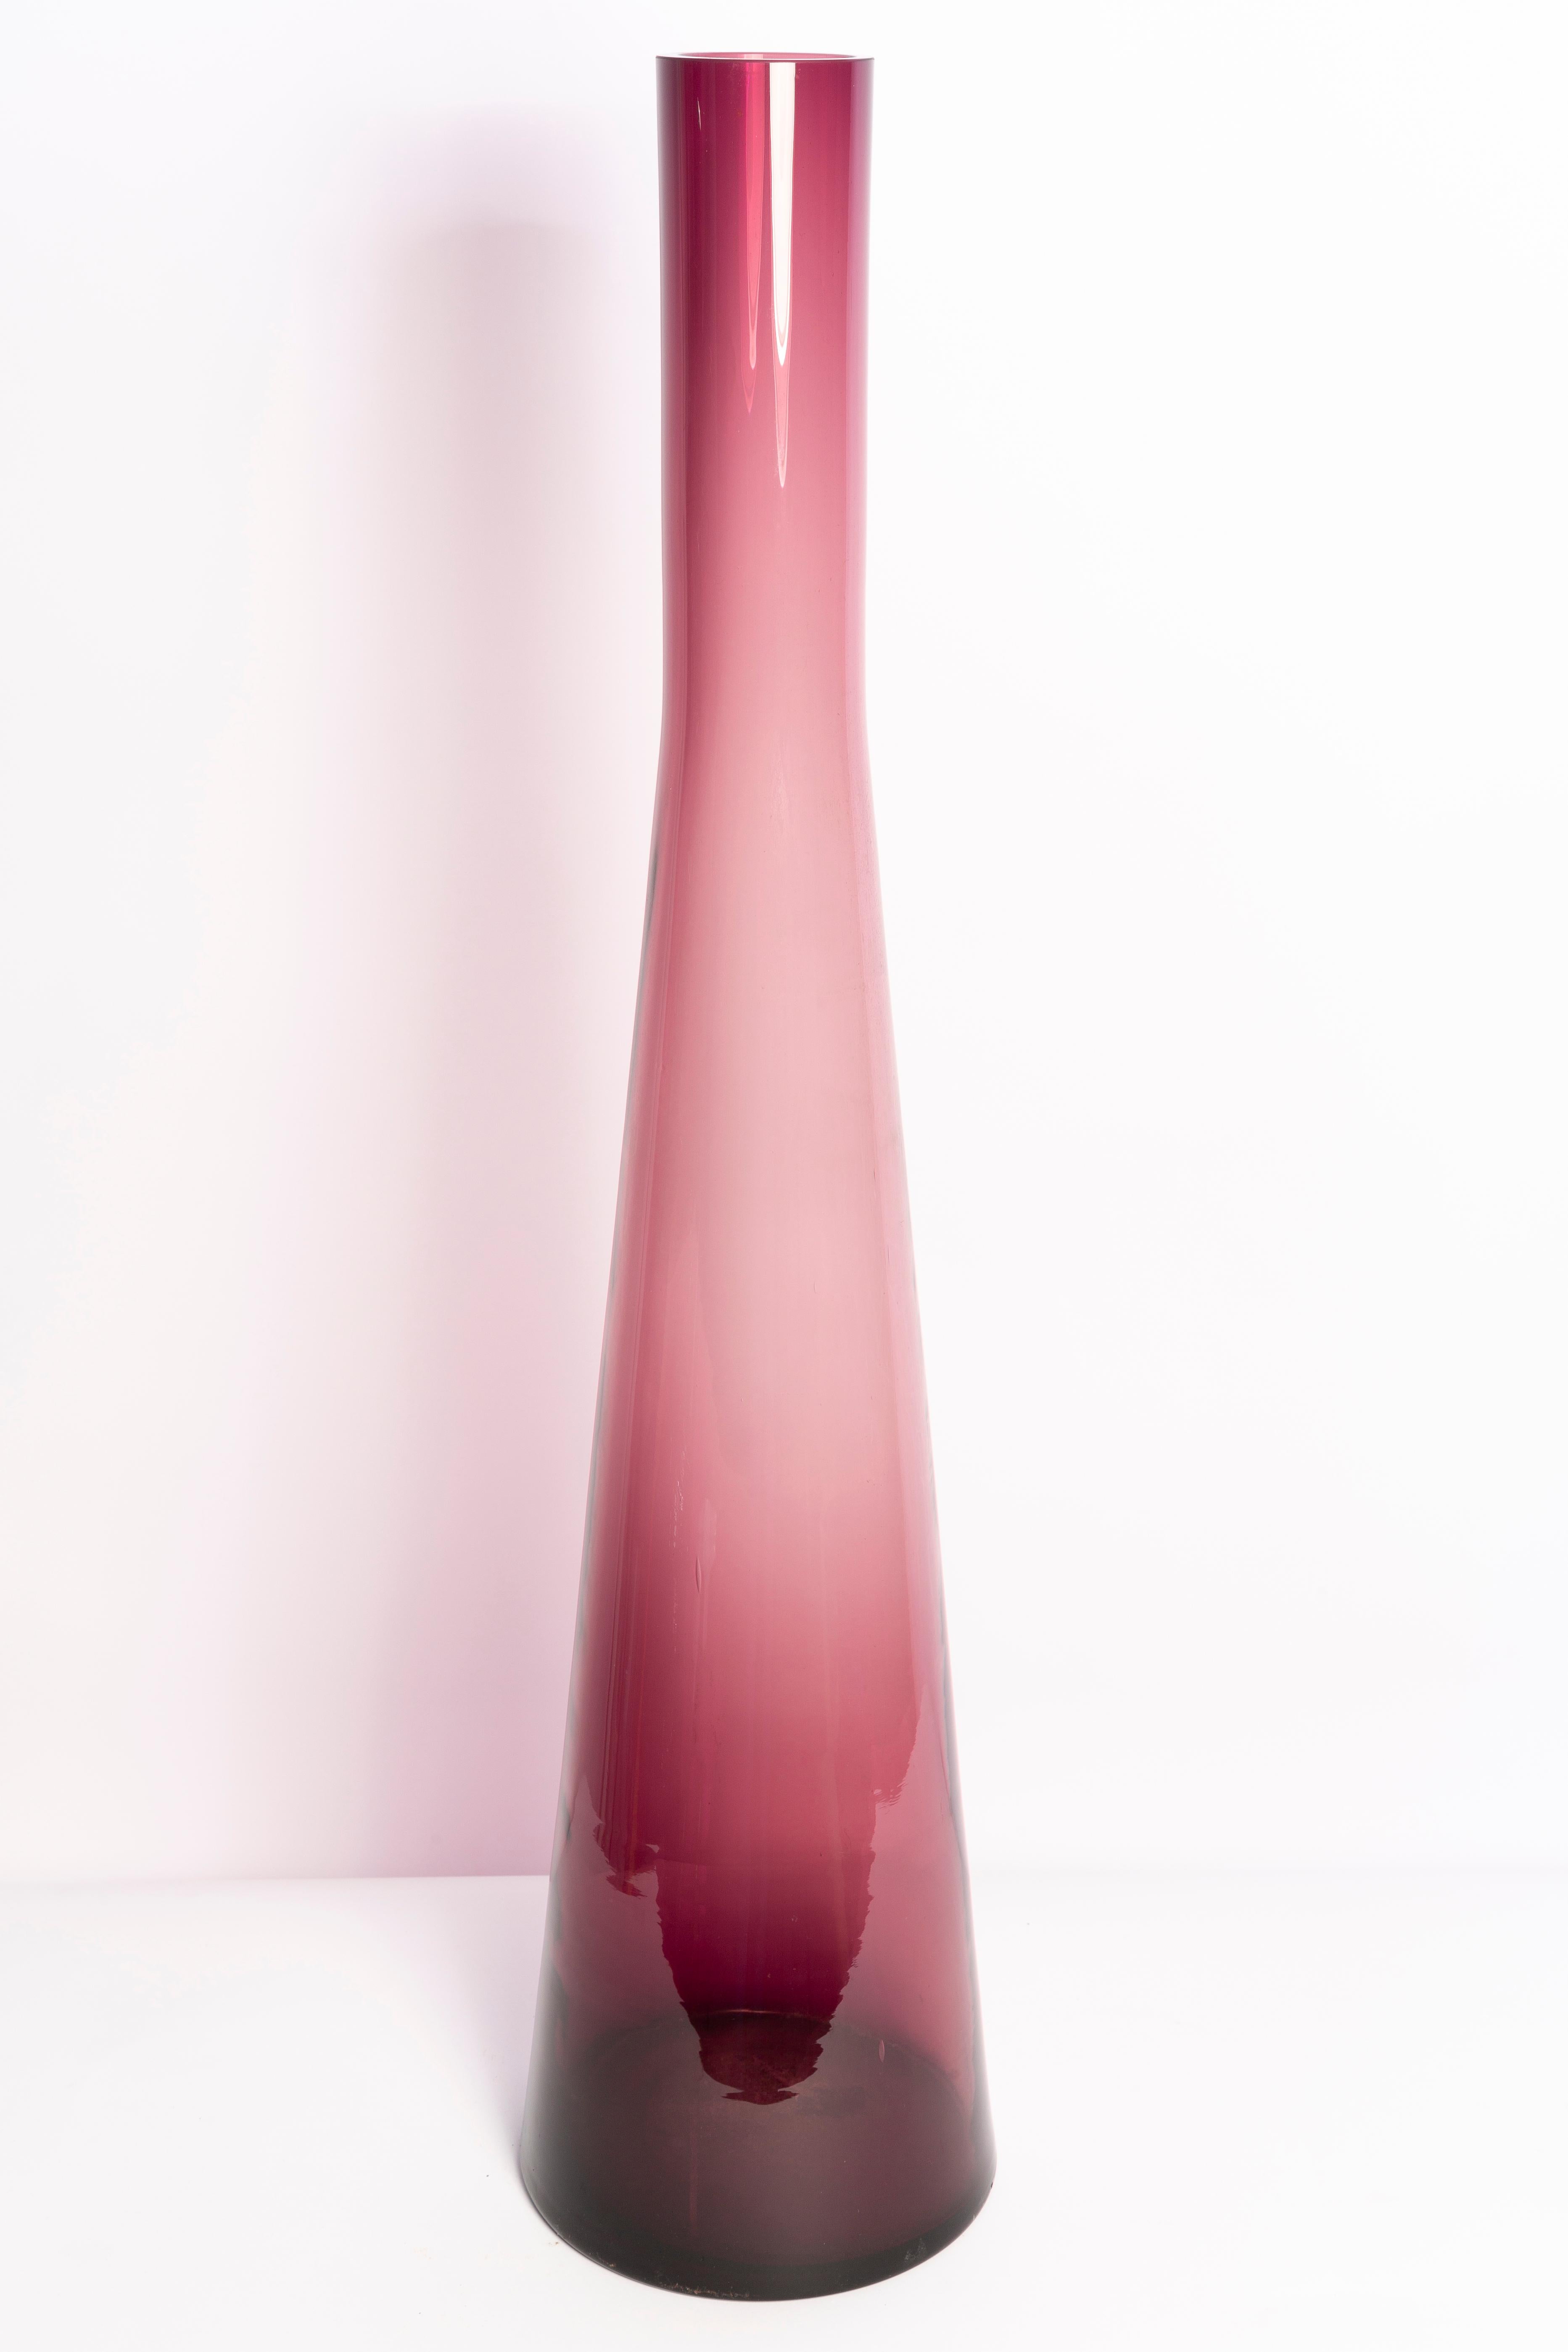 Glass Mid Century Big Vintage Purple Ombre Vase, Italy, 1960s For Sale